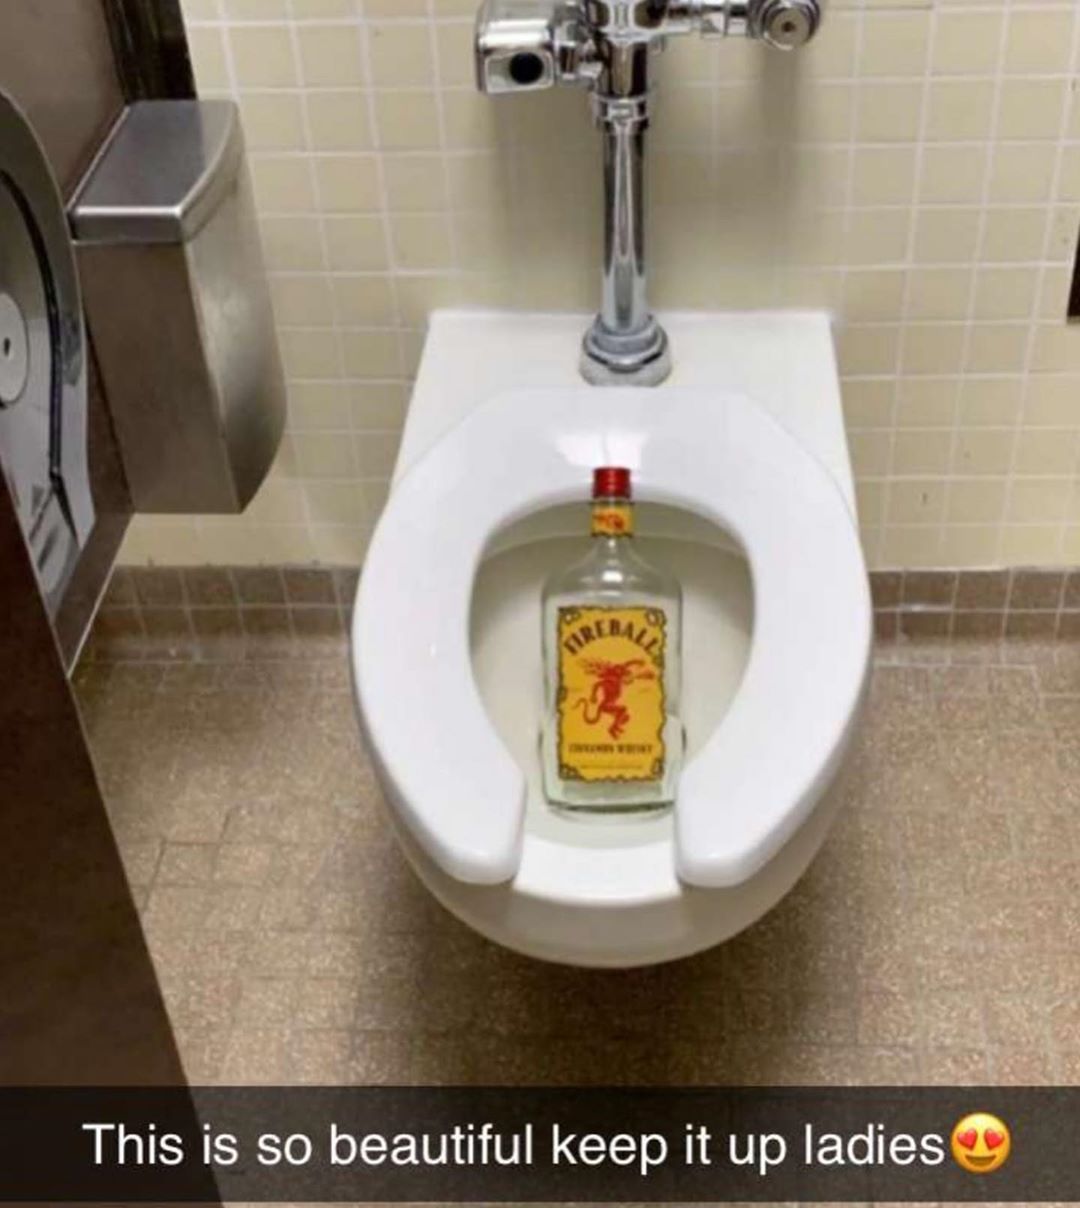 urinal - This is so beautiful keep it up ladies